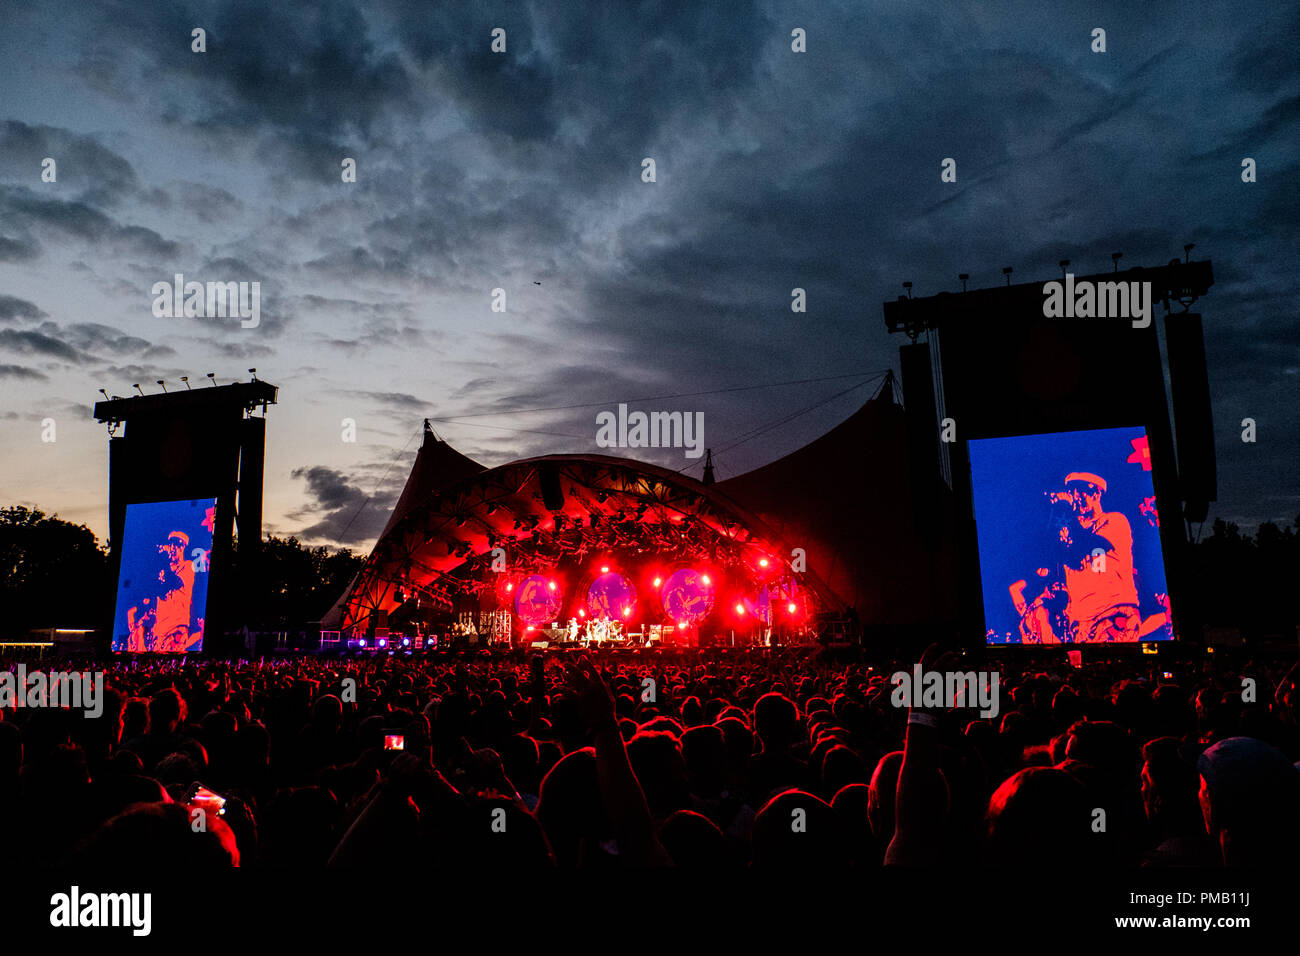 Concert red hot chili hi-res photography images - Alamy